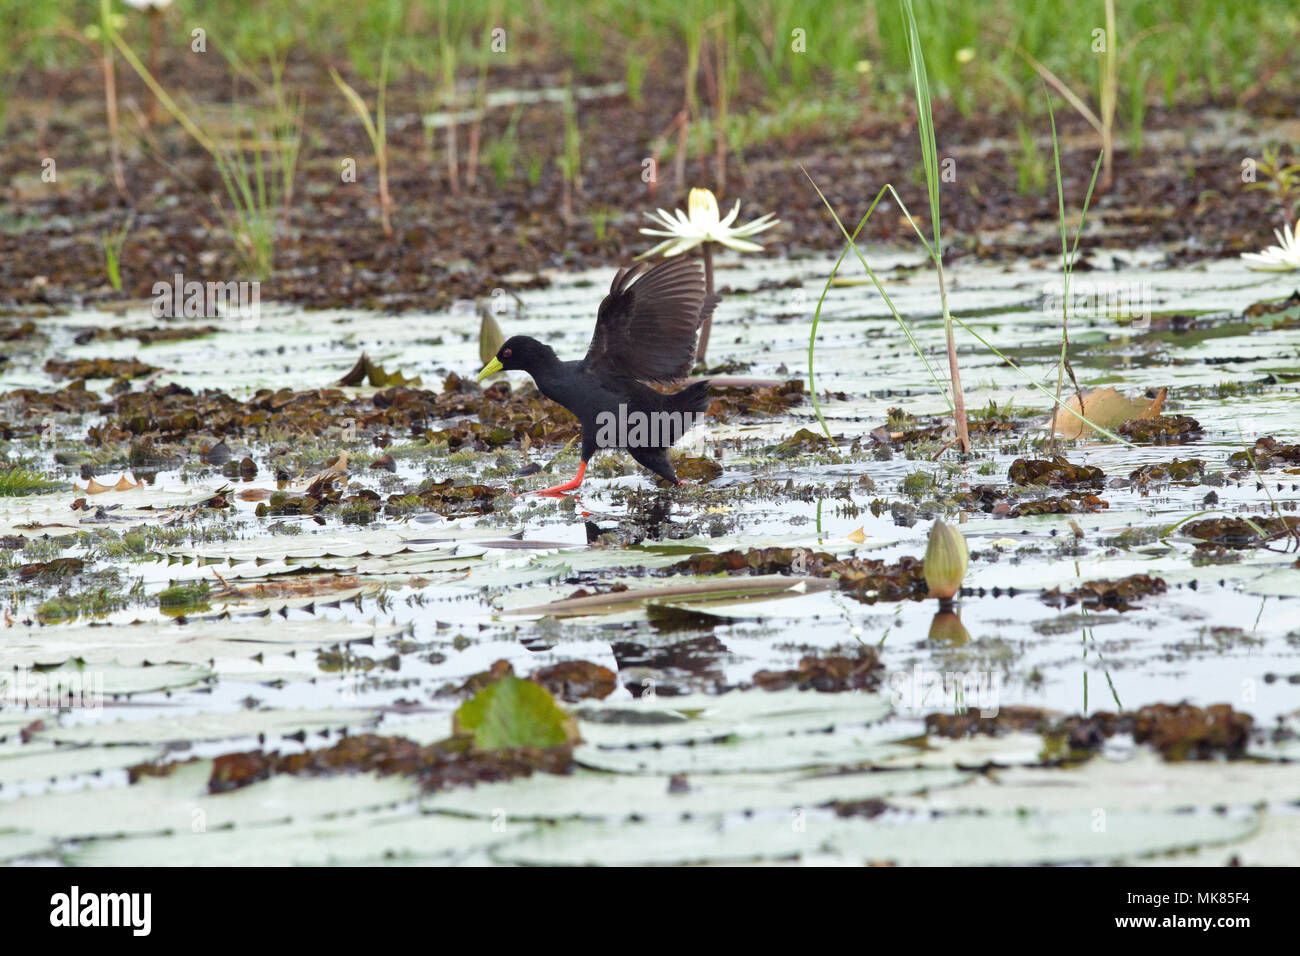 Black Crake (Limnocorax flavirostra). Long legs and toes stride across water surface using waterlily leaves (Nymphaea sp.), wings open to balance bird. Stock Photo